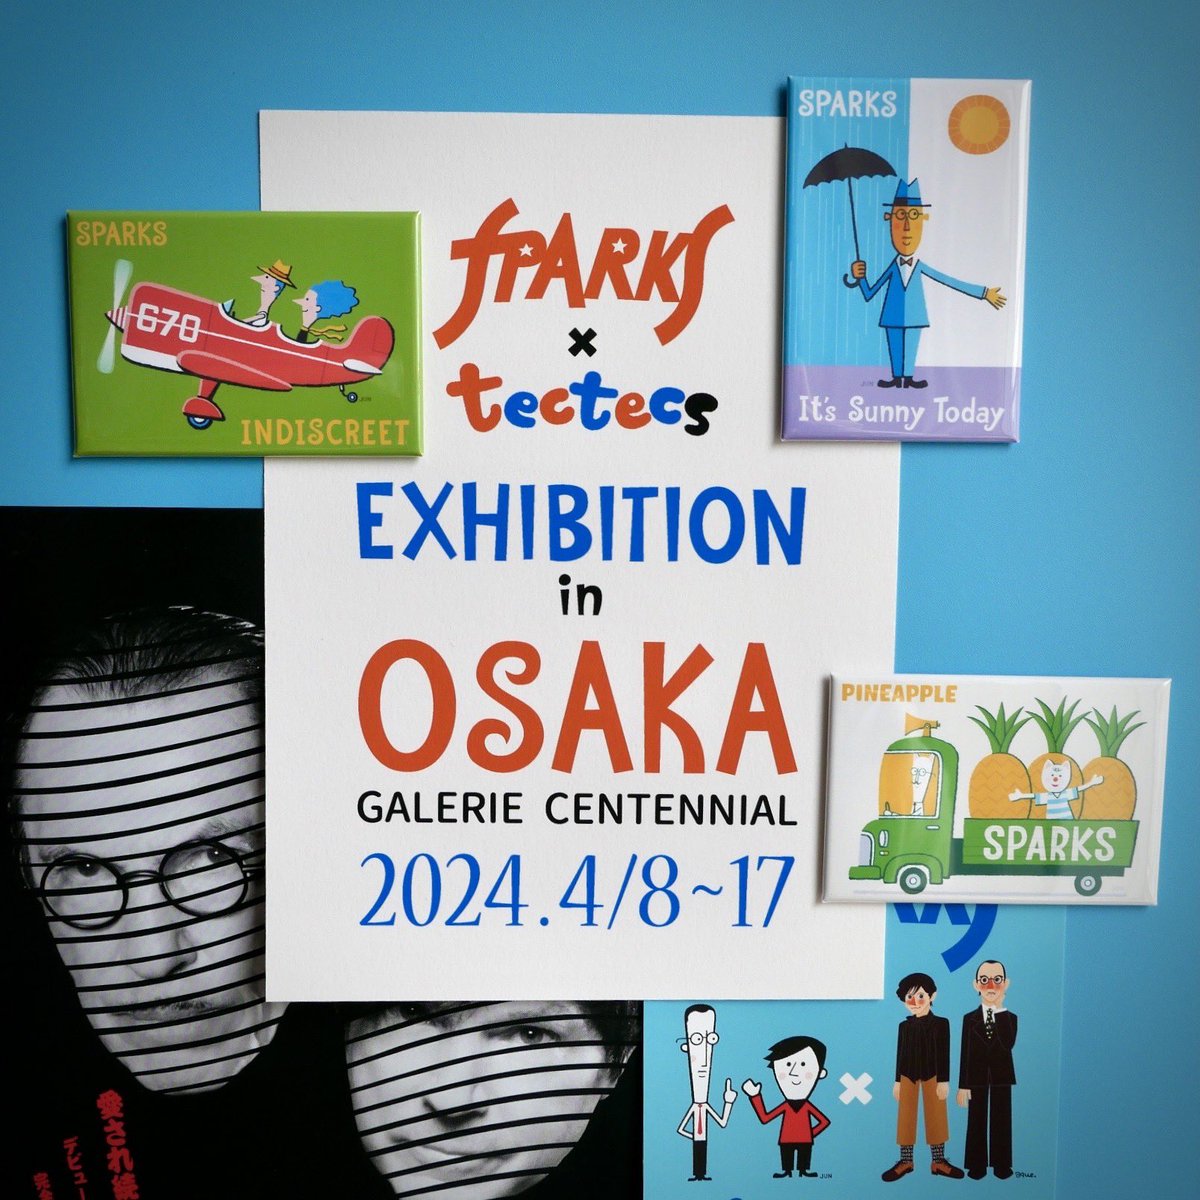 tectecs will hold an exhibition in Osaka.Japan. Illustrations featuring Sparks will be exhibited and official goods will be sold. tectecsが大阪で展覧会を開催！ スパークスをテーマに描いたイラストの展示と公式グッズの販売をいたします。 @sparksofficial #sparks #スパークス #tectecs